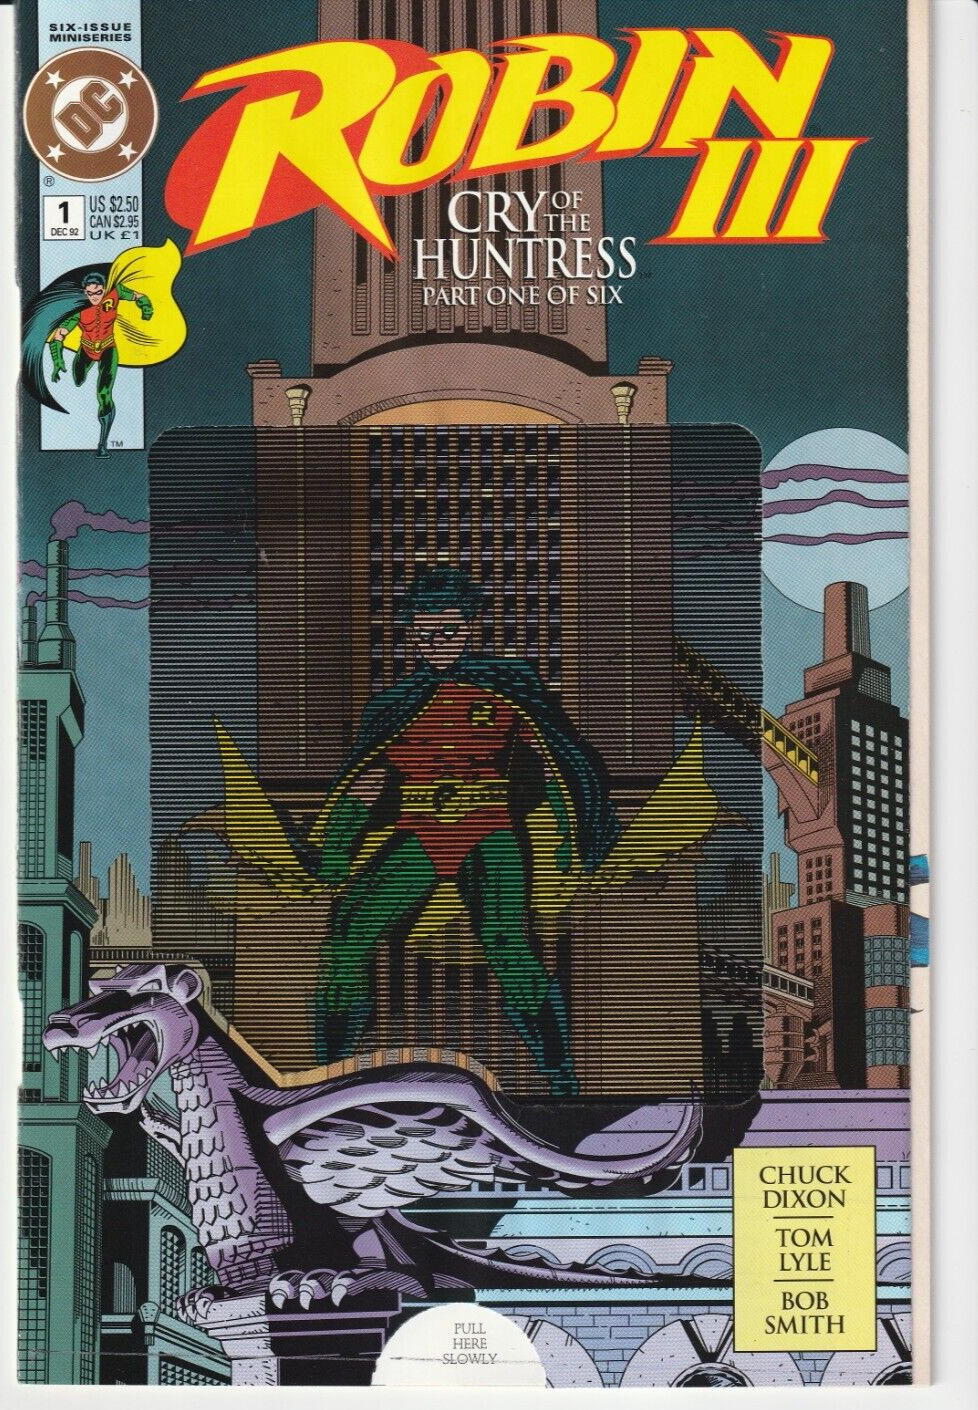 Robin 3 Cry of the Huntress #1,2,3,4,5,6 Complete Set/Chuck Dixon/Mike Zeck/1992